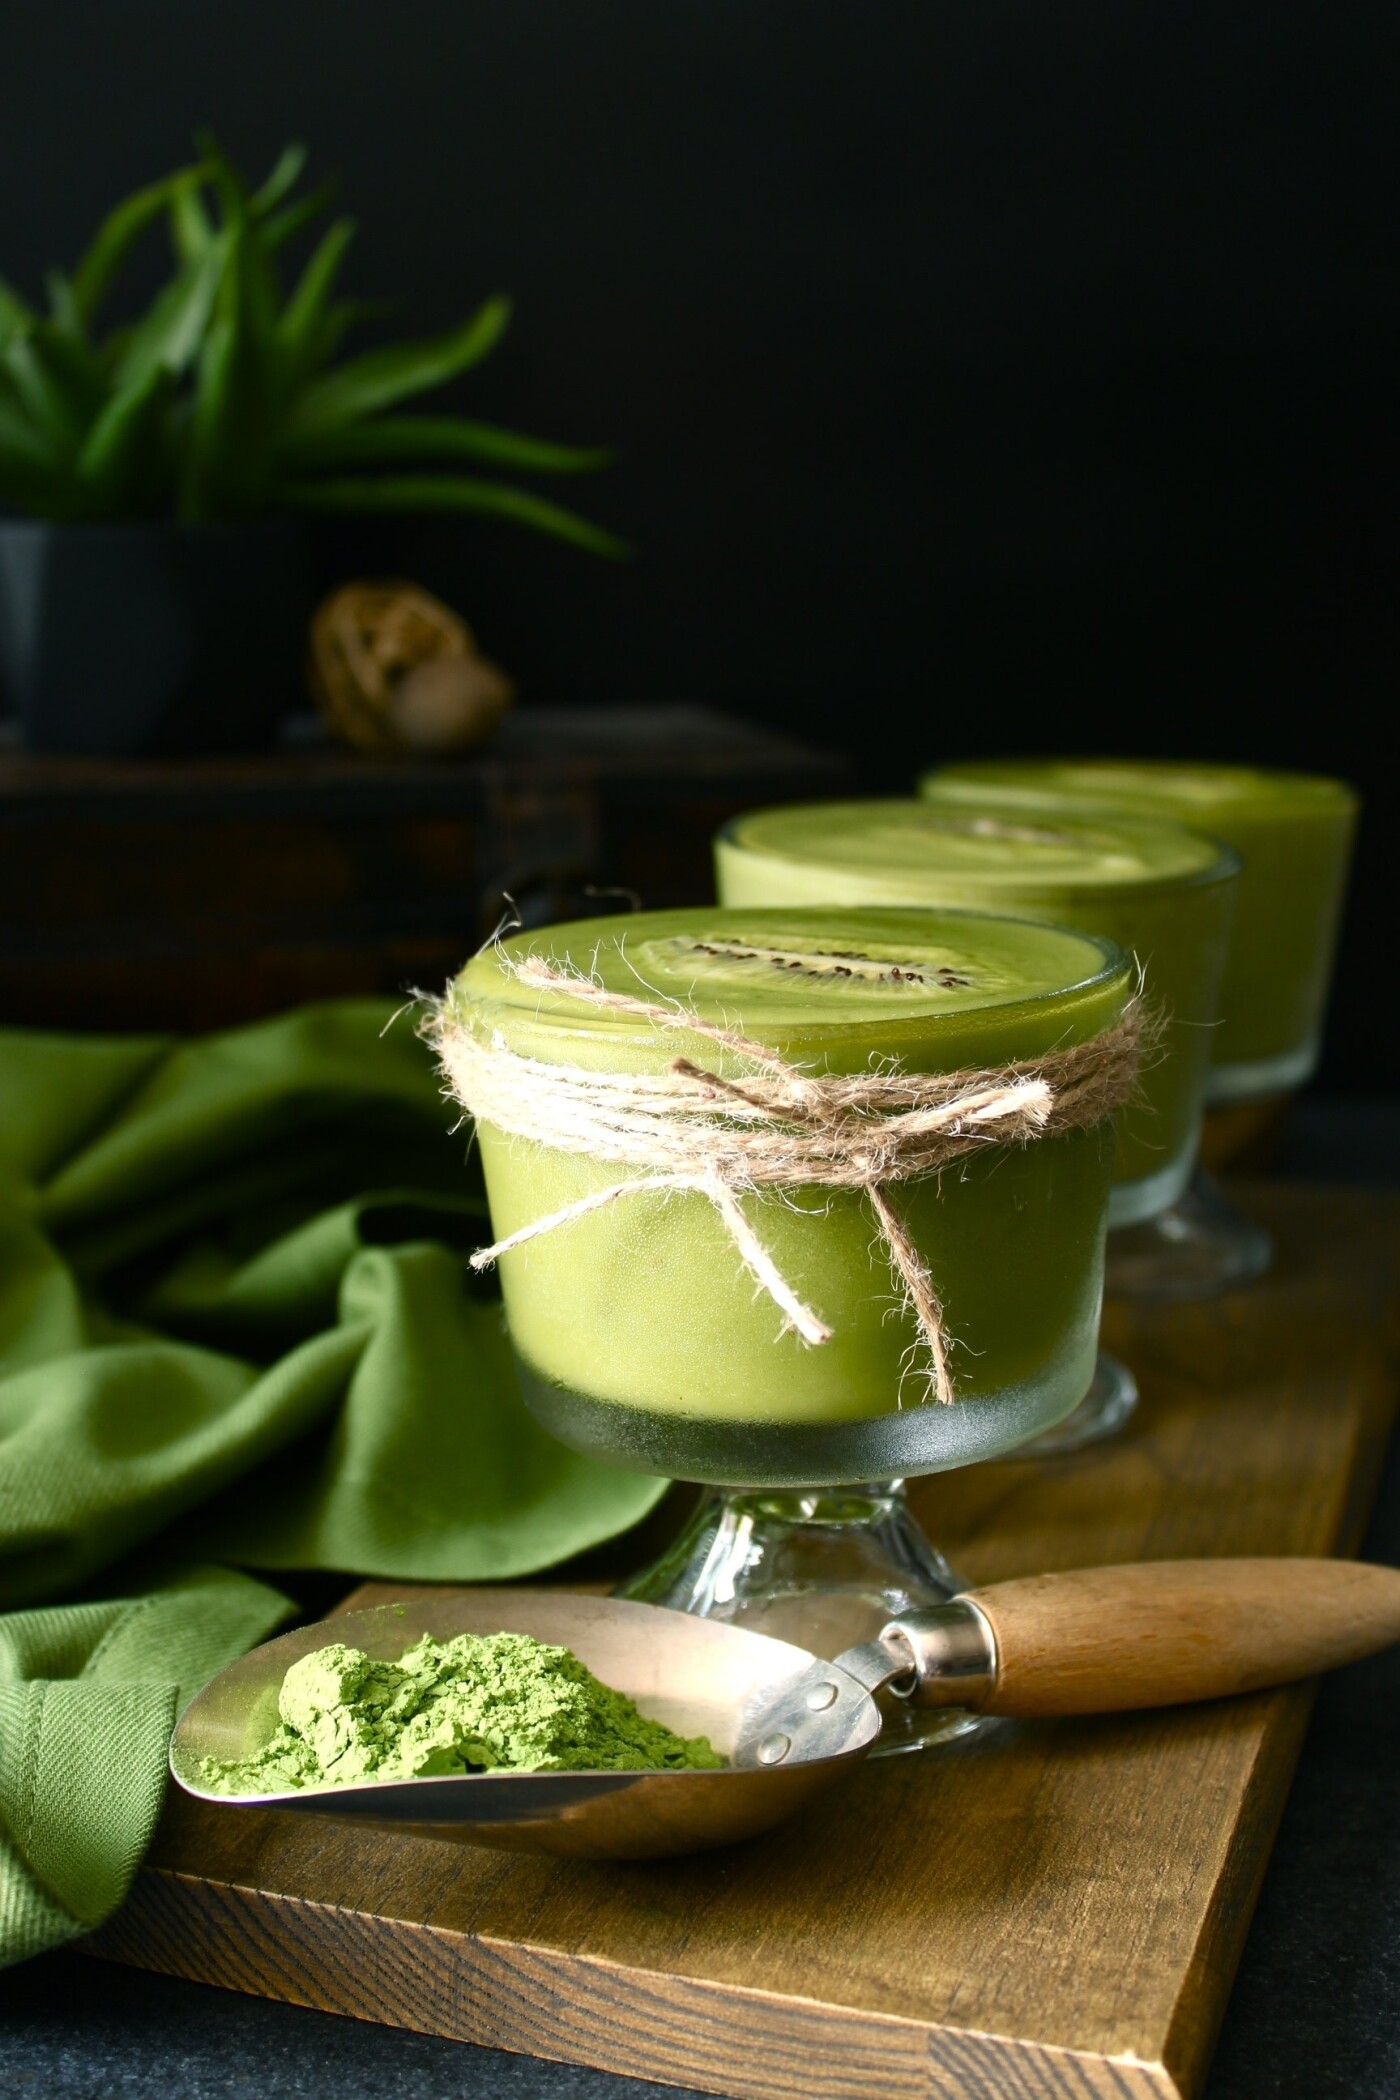 This is one of my favorite ways I enjoy green tea, also known as, matcha. It's made with almond milk, frozen bananas, and matcha tea powder. It's sweet, thick and creamy, and super satisfying. Practically perfection.